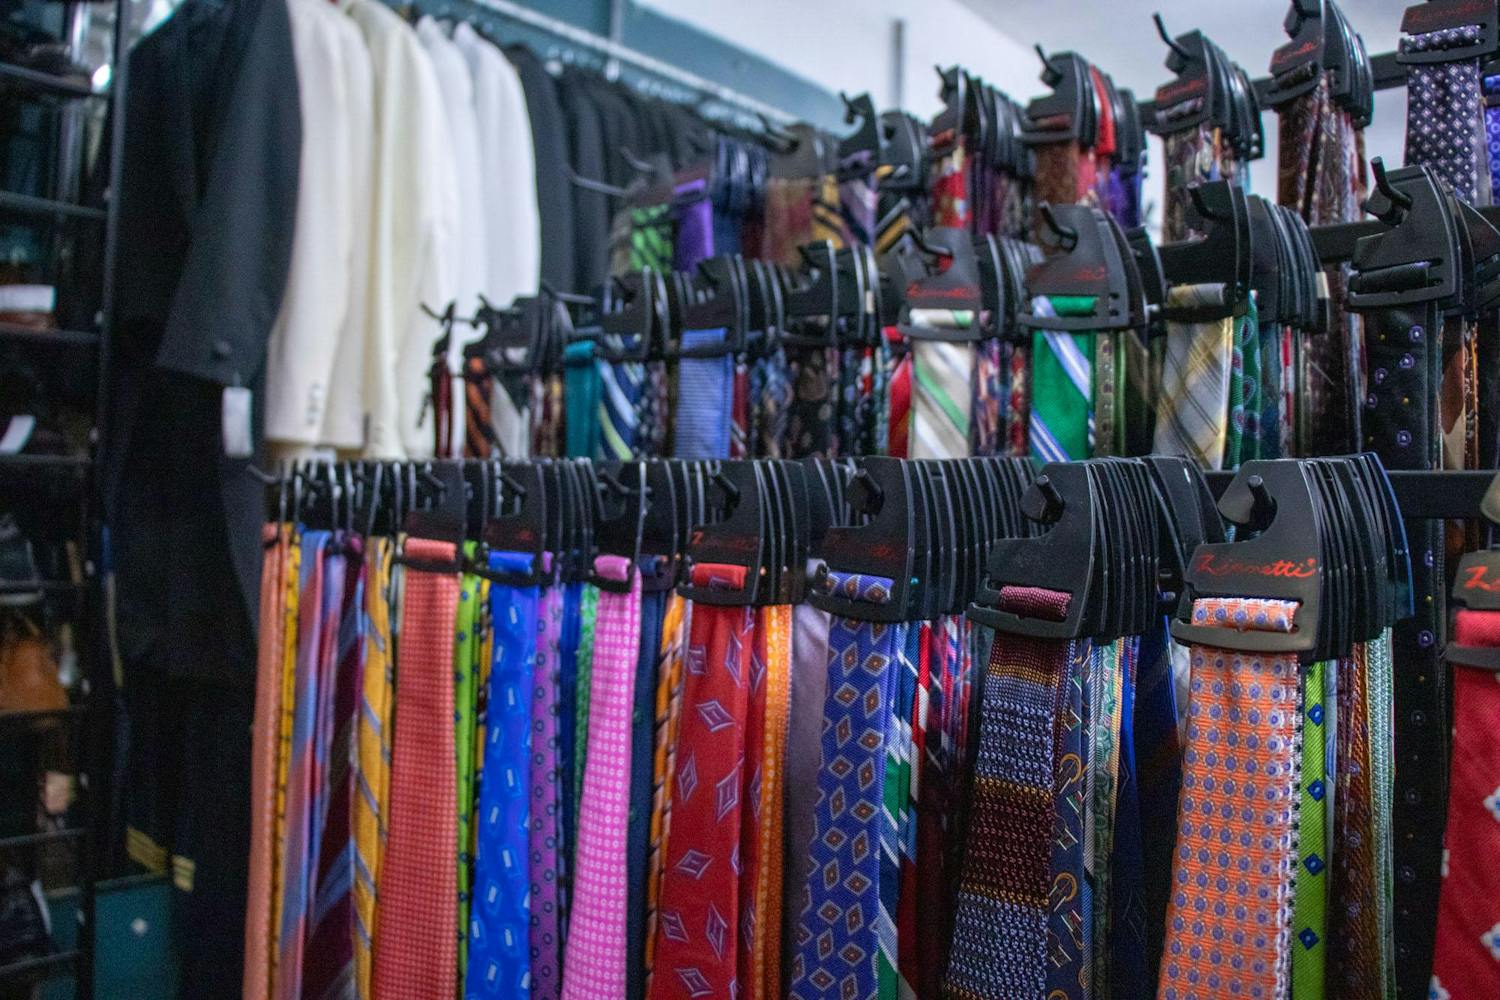 An assortment of ties hang on display inside the Gentleman's Closet consignment shop in Five Points on Jan. 30, 2024. The shop sources many of its ties from other men’s clothing stores that are replacing out-of-season clothes.